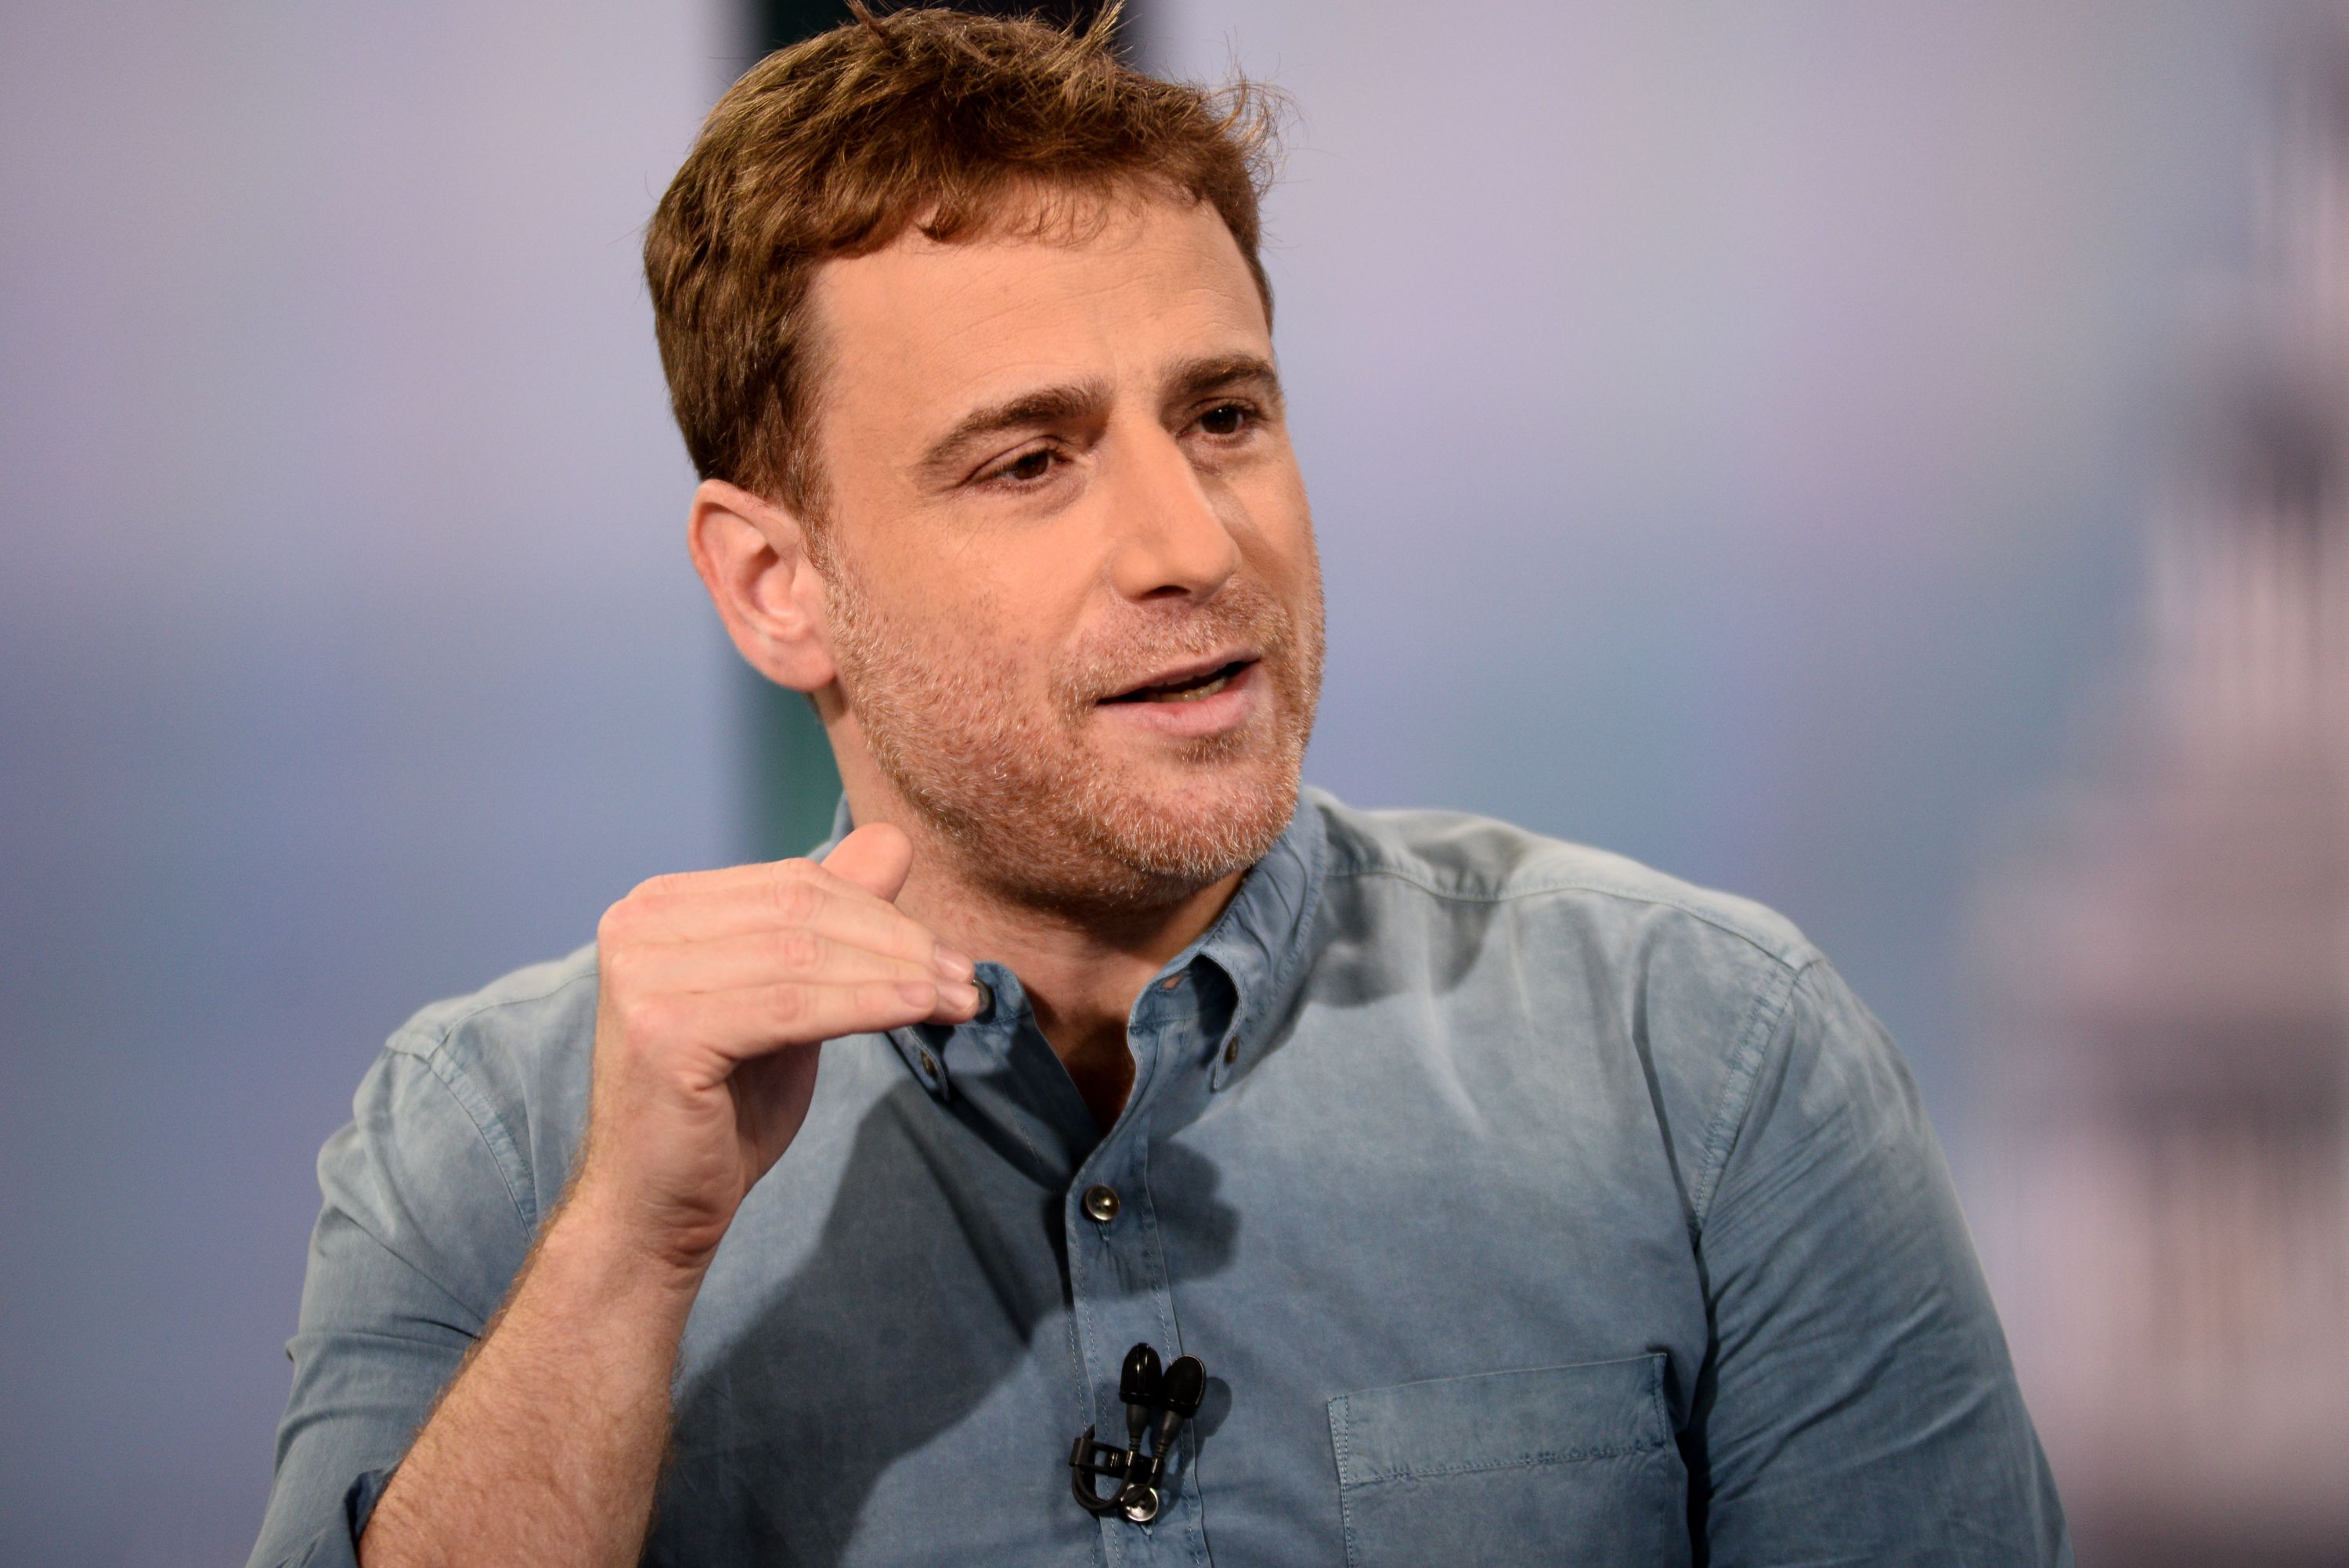 Slack CEO predicts end of company email as we know it in 7 years